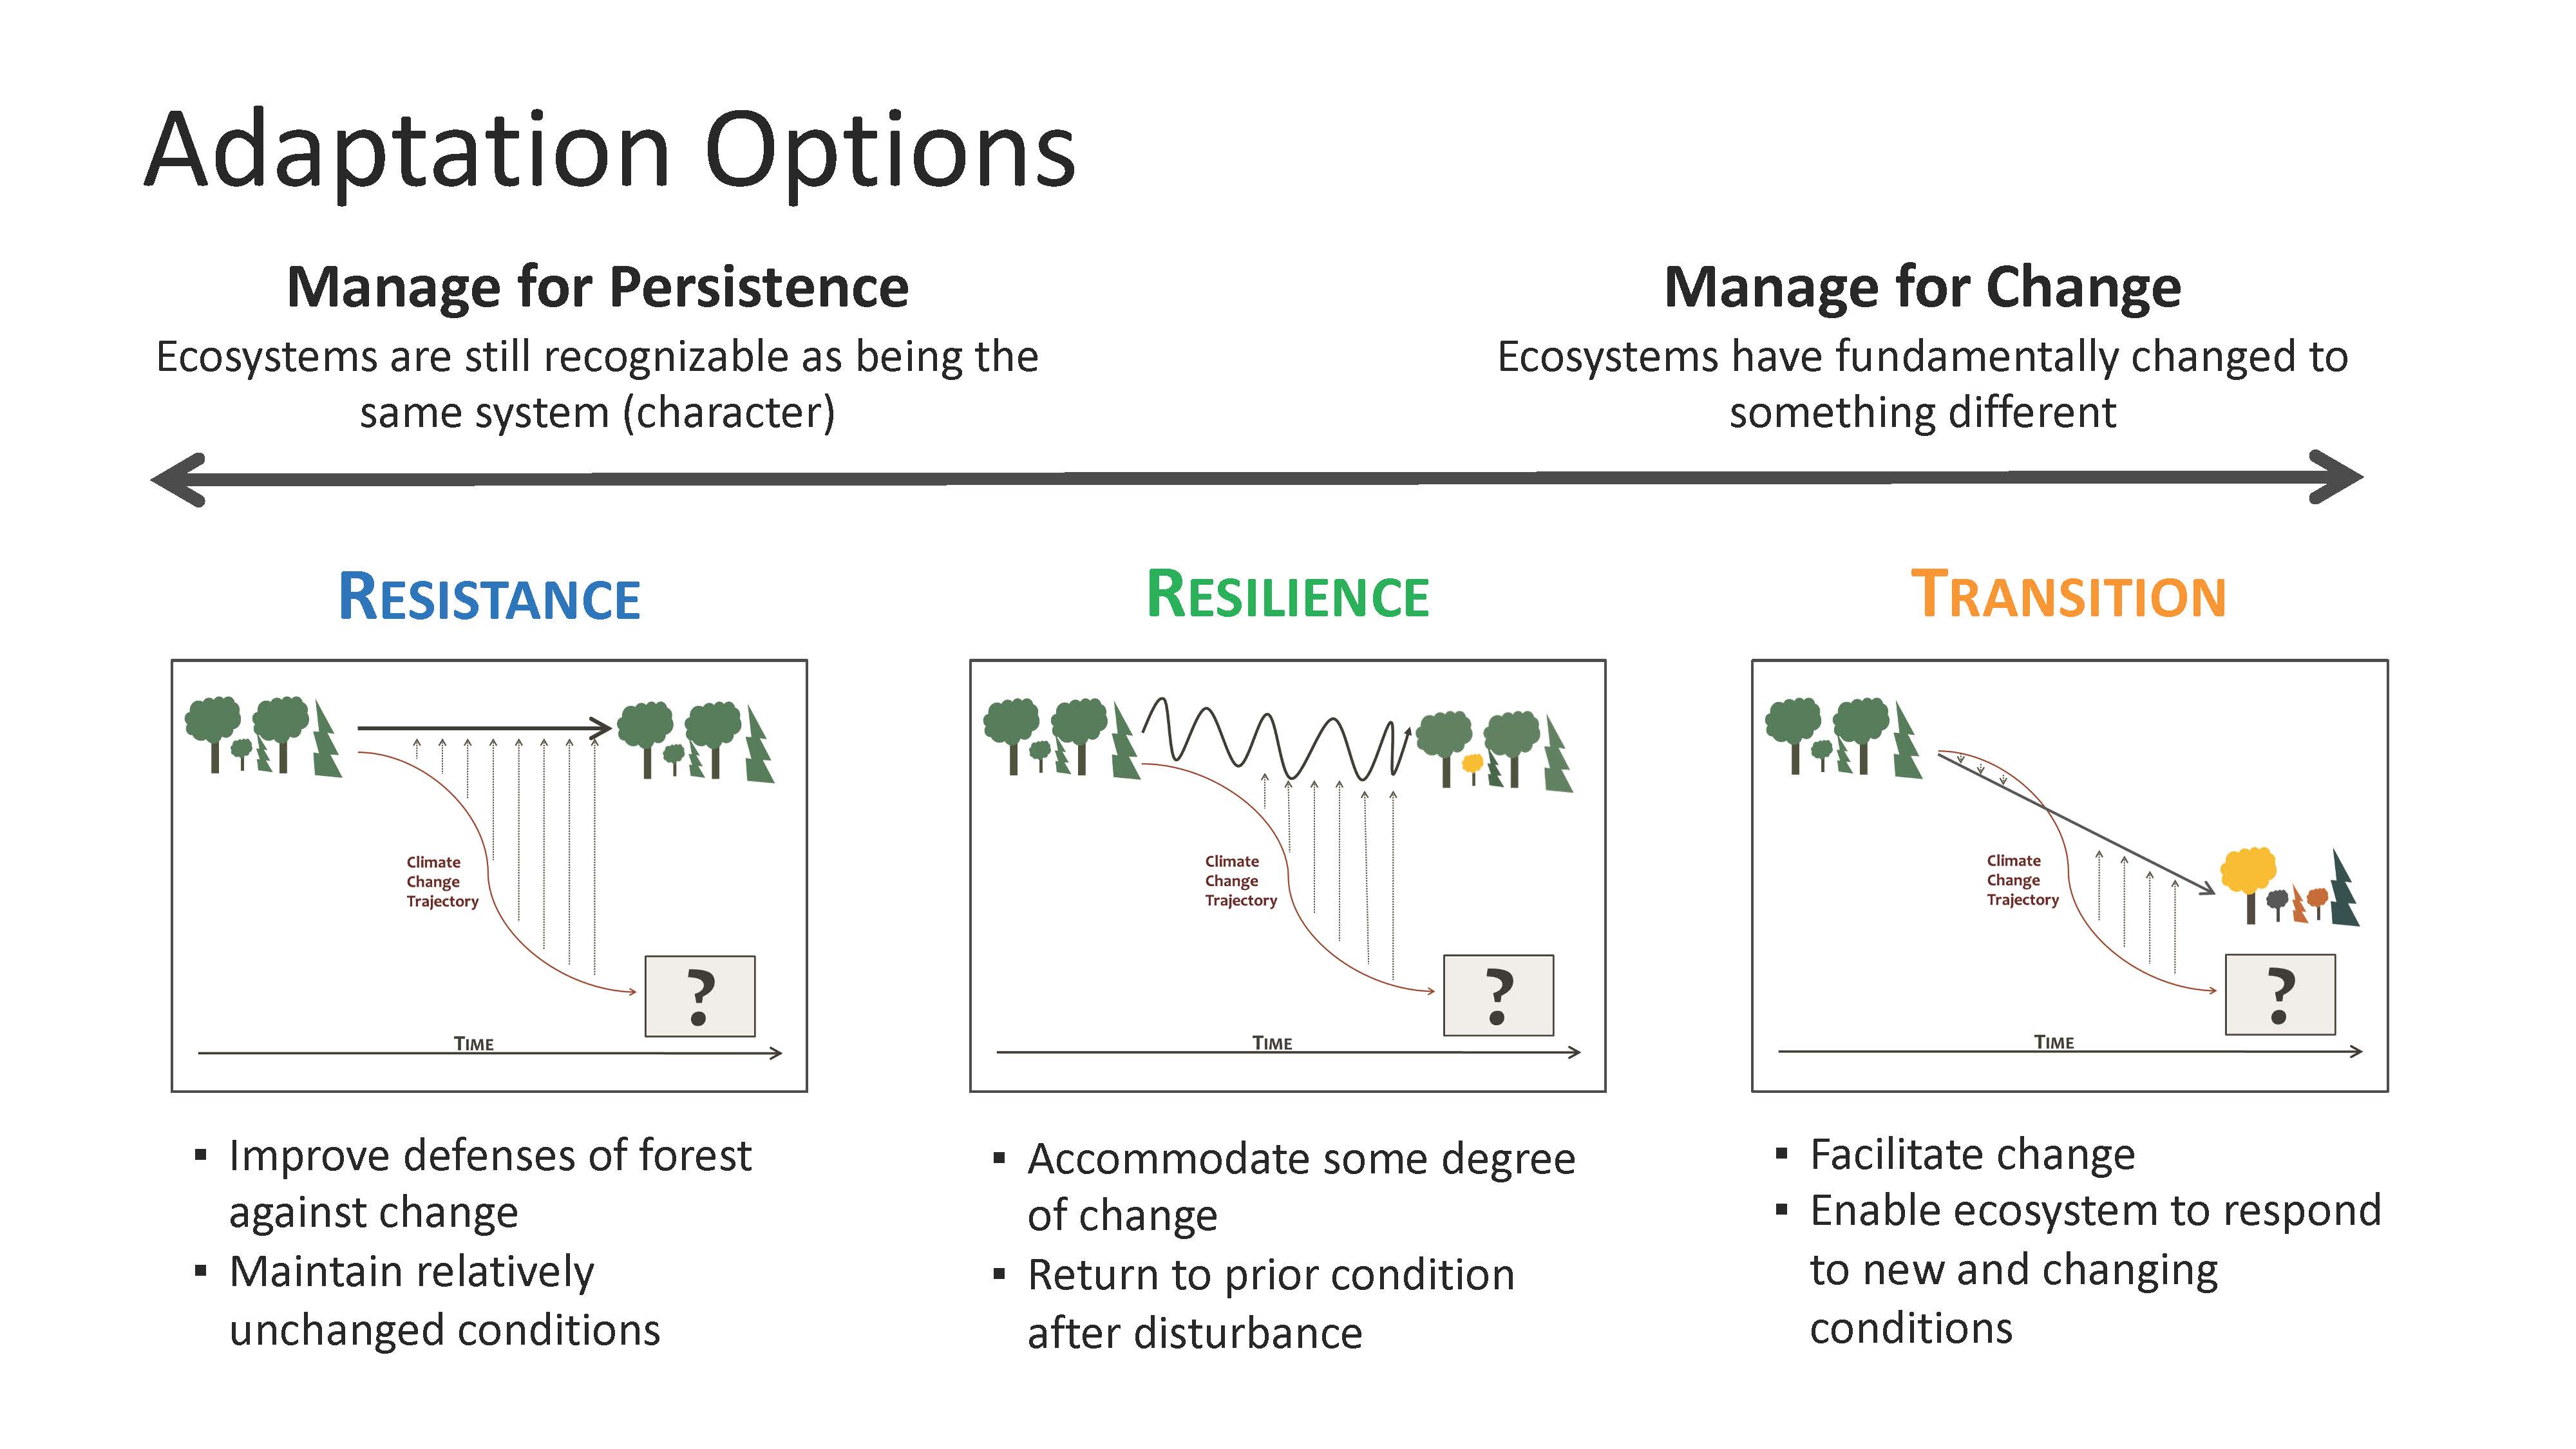 Resistance, resilience, and transition are the adaptation options used in the ASCC trial sites.